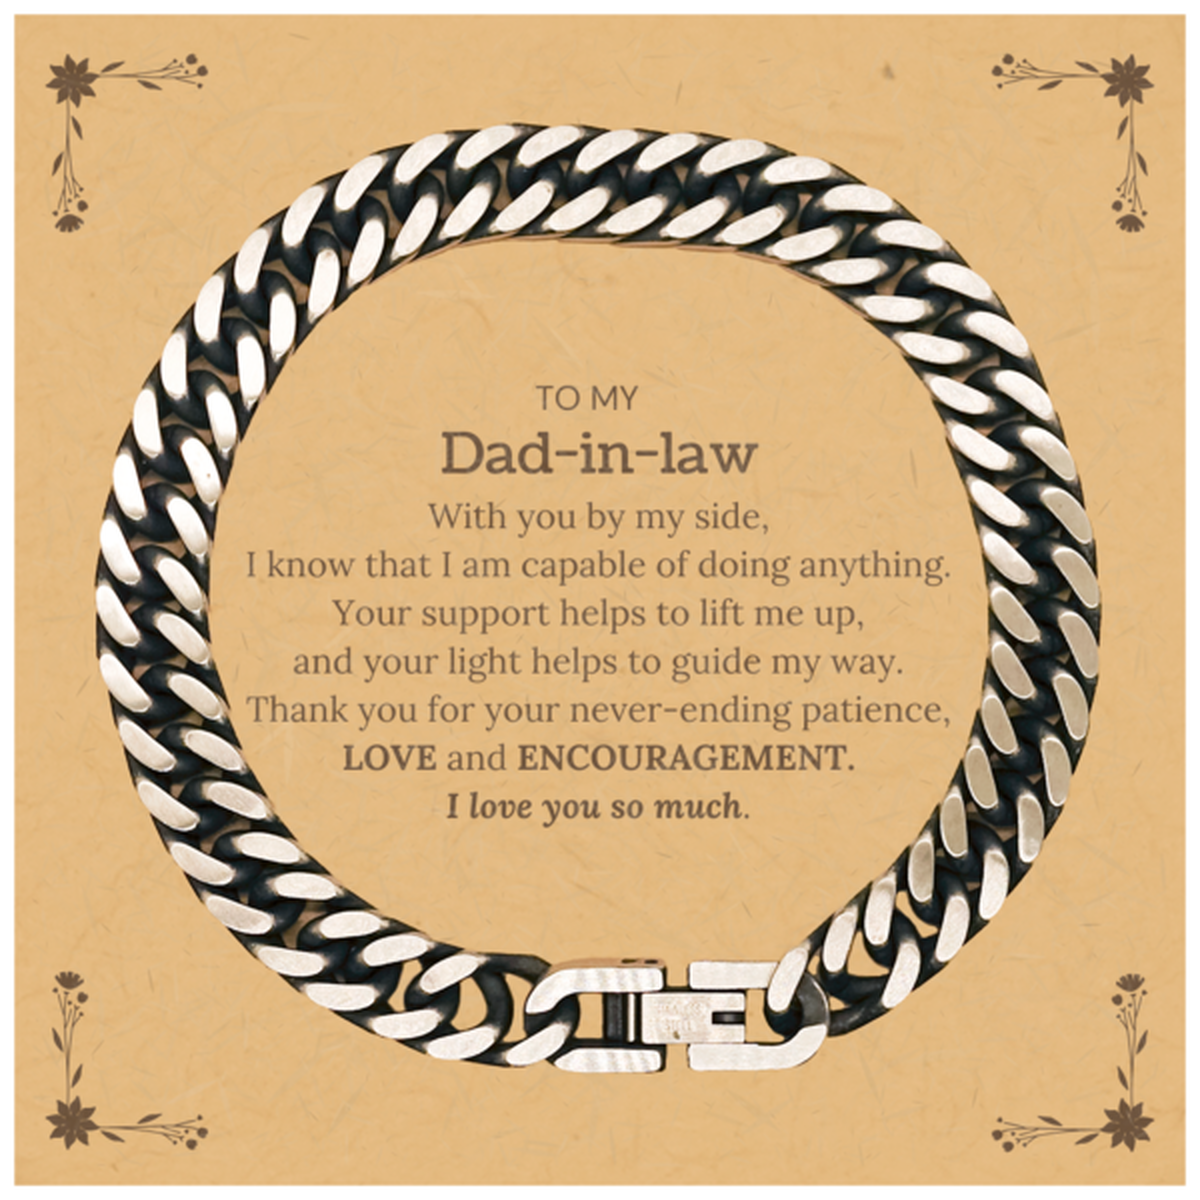 Appreciation Dad-in-law Cuban Link Chain Bracelet Gifts, To My Dad-in-law Birthday Christmas Wedding Keepsake Gifts for Dad-in-law With you by my side, I know that I am capable of doing anything. I love you so much